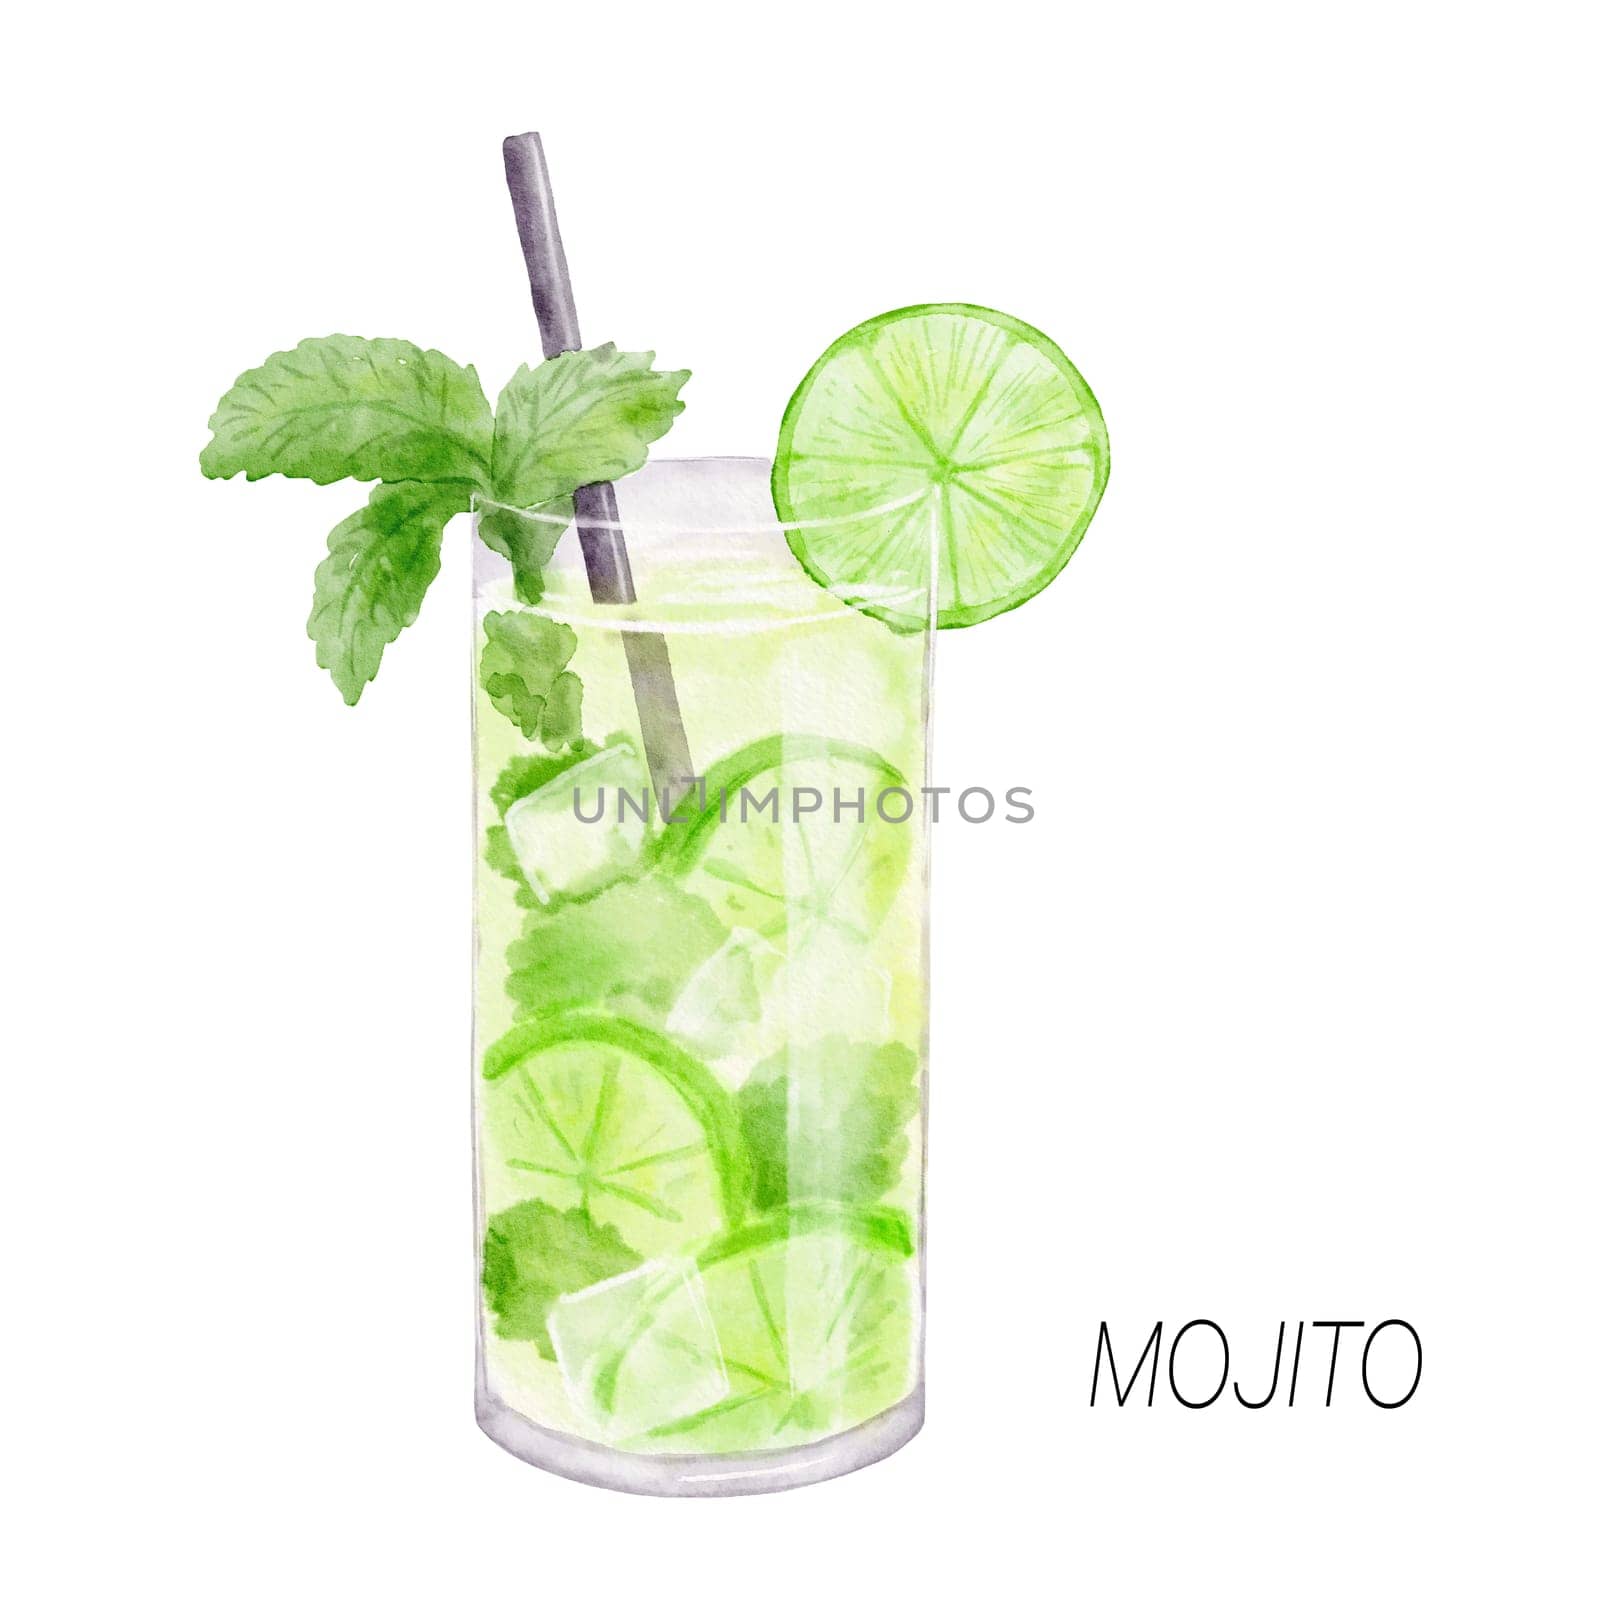 Mojito cocktail. Watercolor illustration of drink in glass isolated on white background